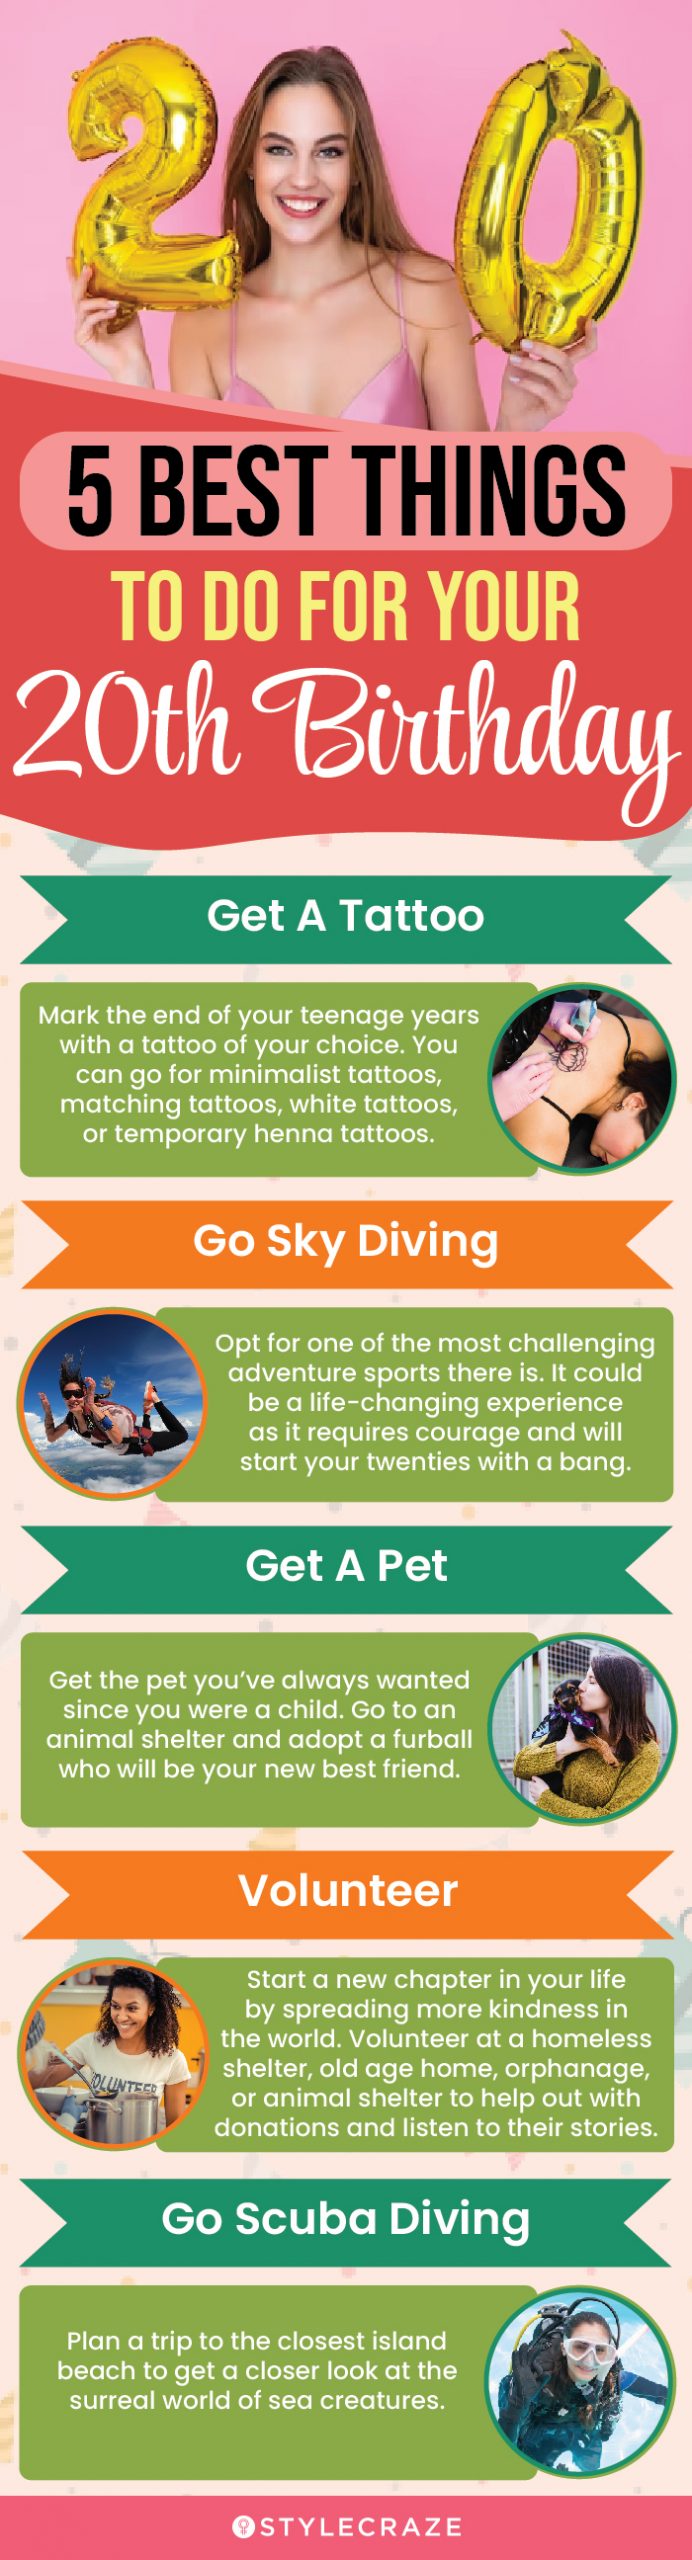 5 best things to do for your 20th birthday (infographic)